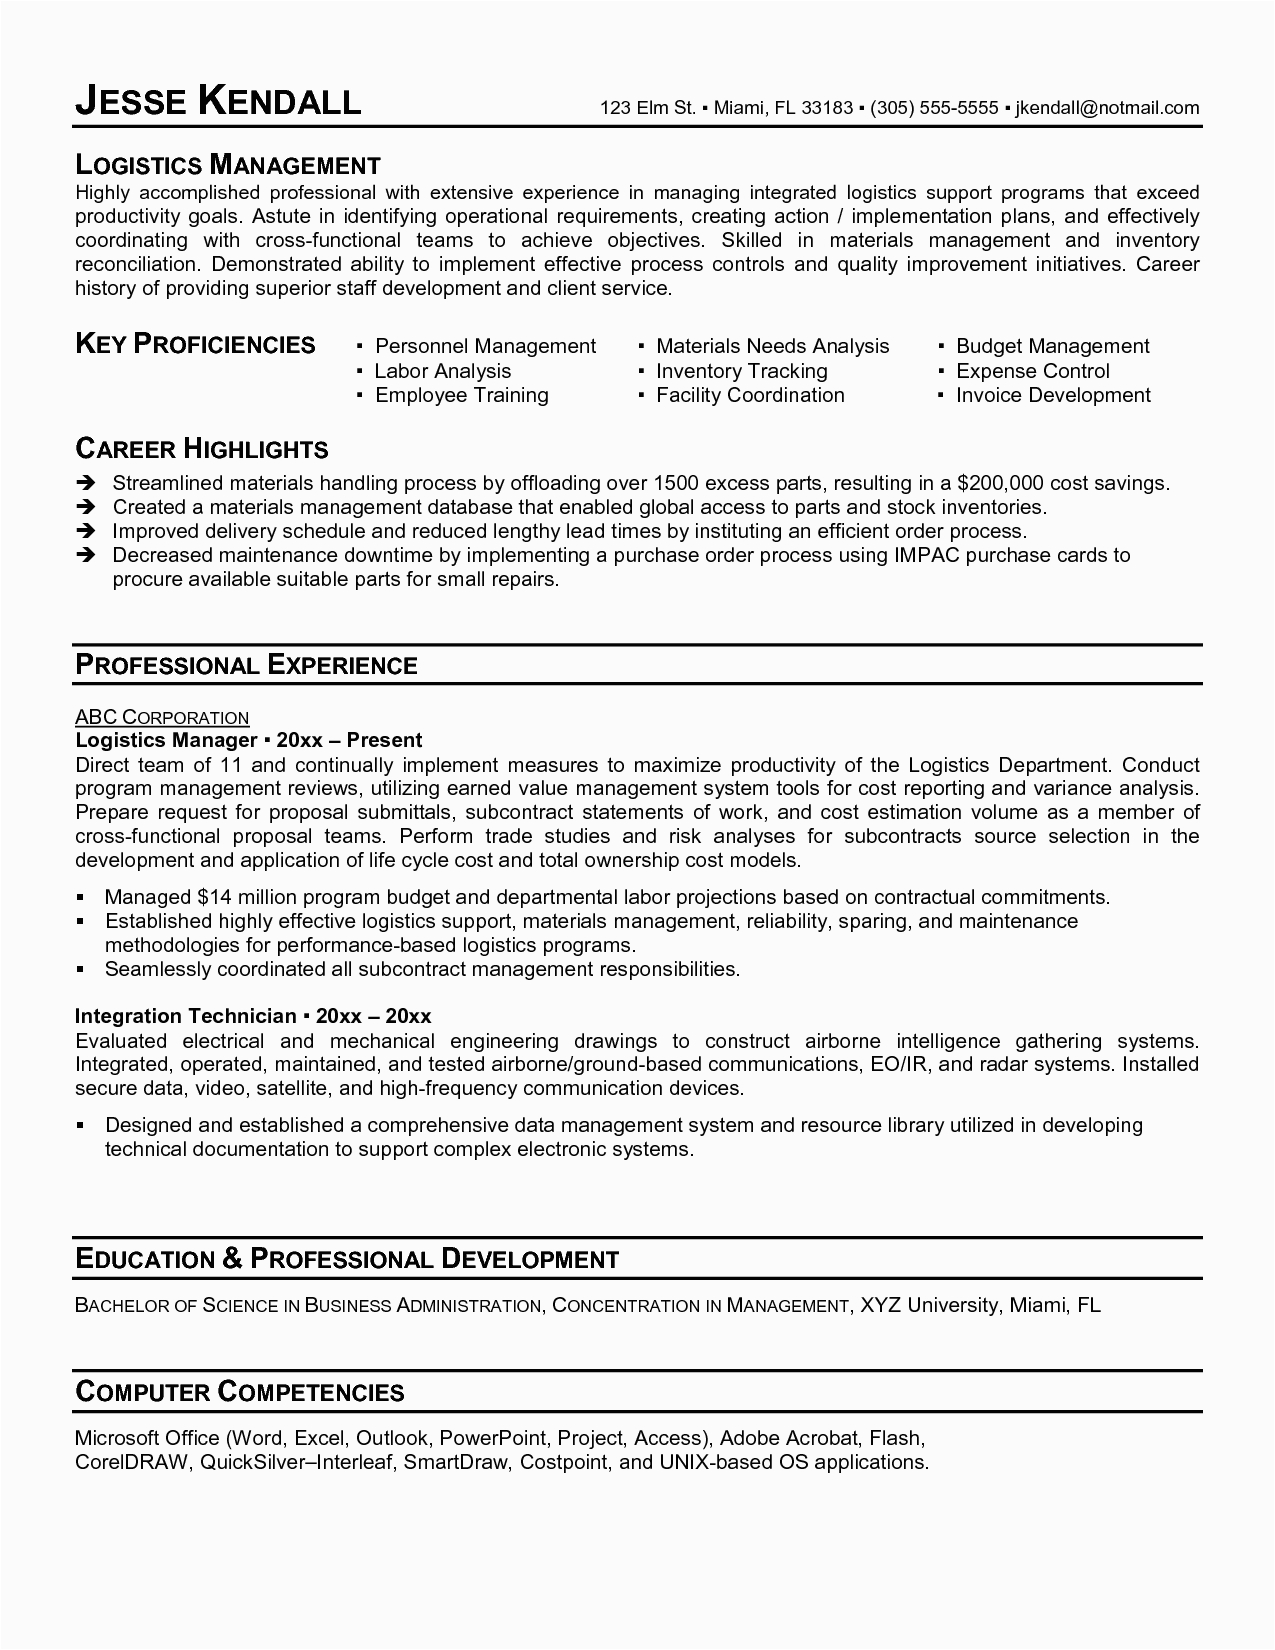 Resume Sample for A 3pl Company Logistics Manager Resume Example